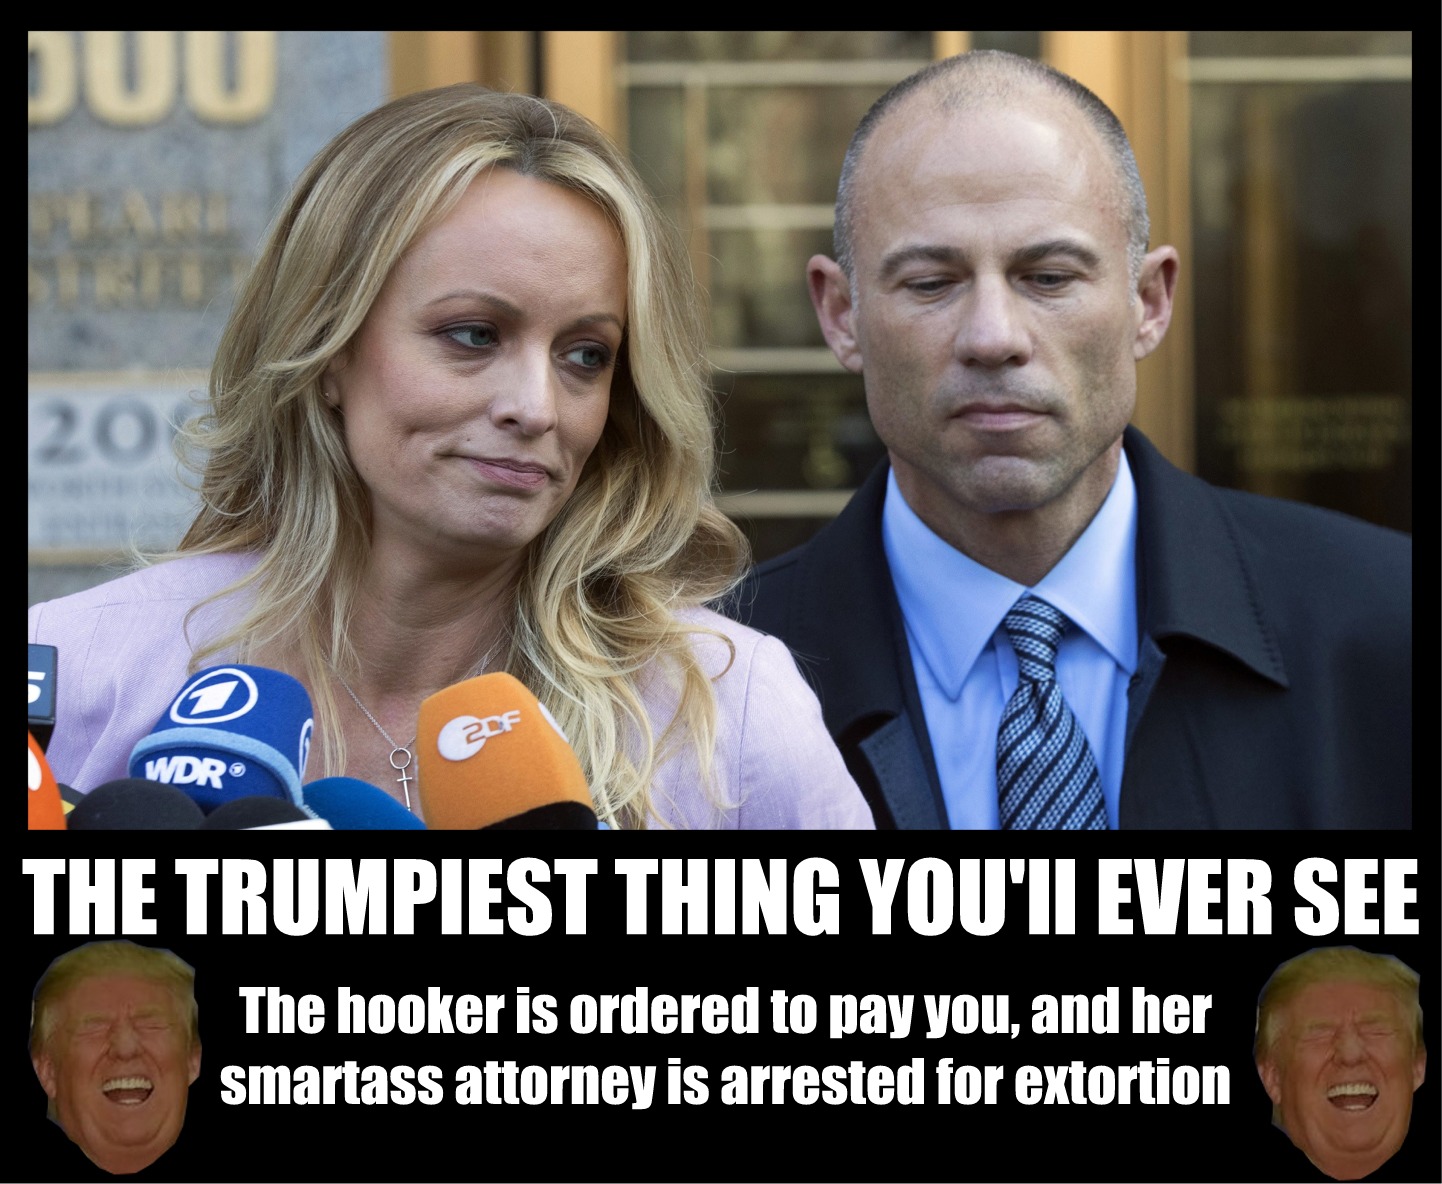 stormy daniels - 20F Wdr The Trumpiest Thing You'Ii Ever See The hooker is ordered to pay you, and her smartass attorney is arrested for extortion